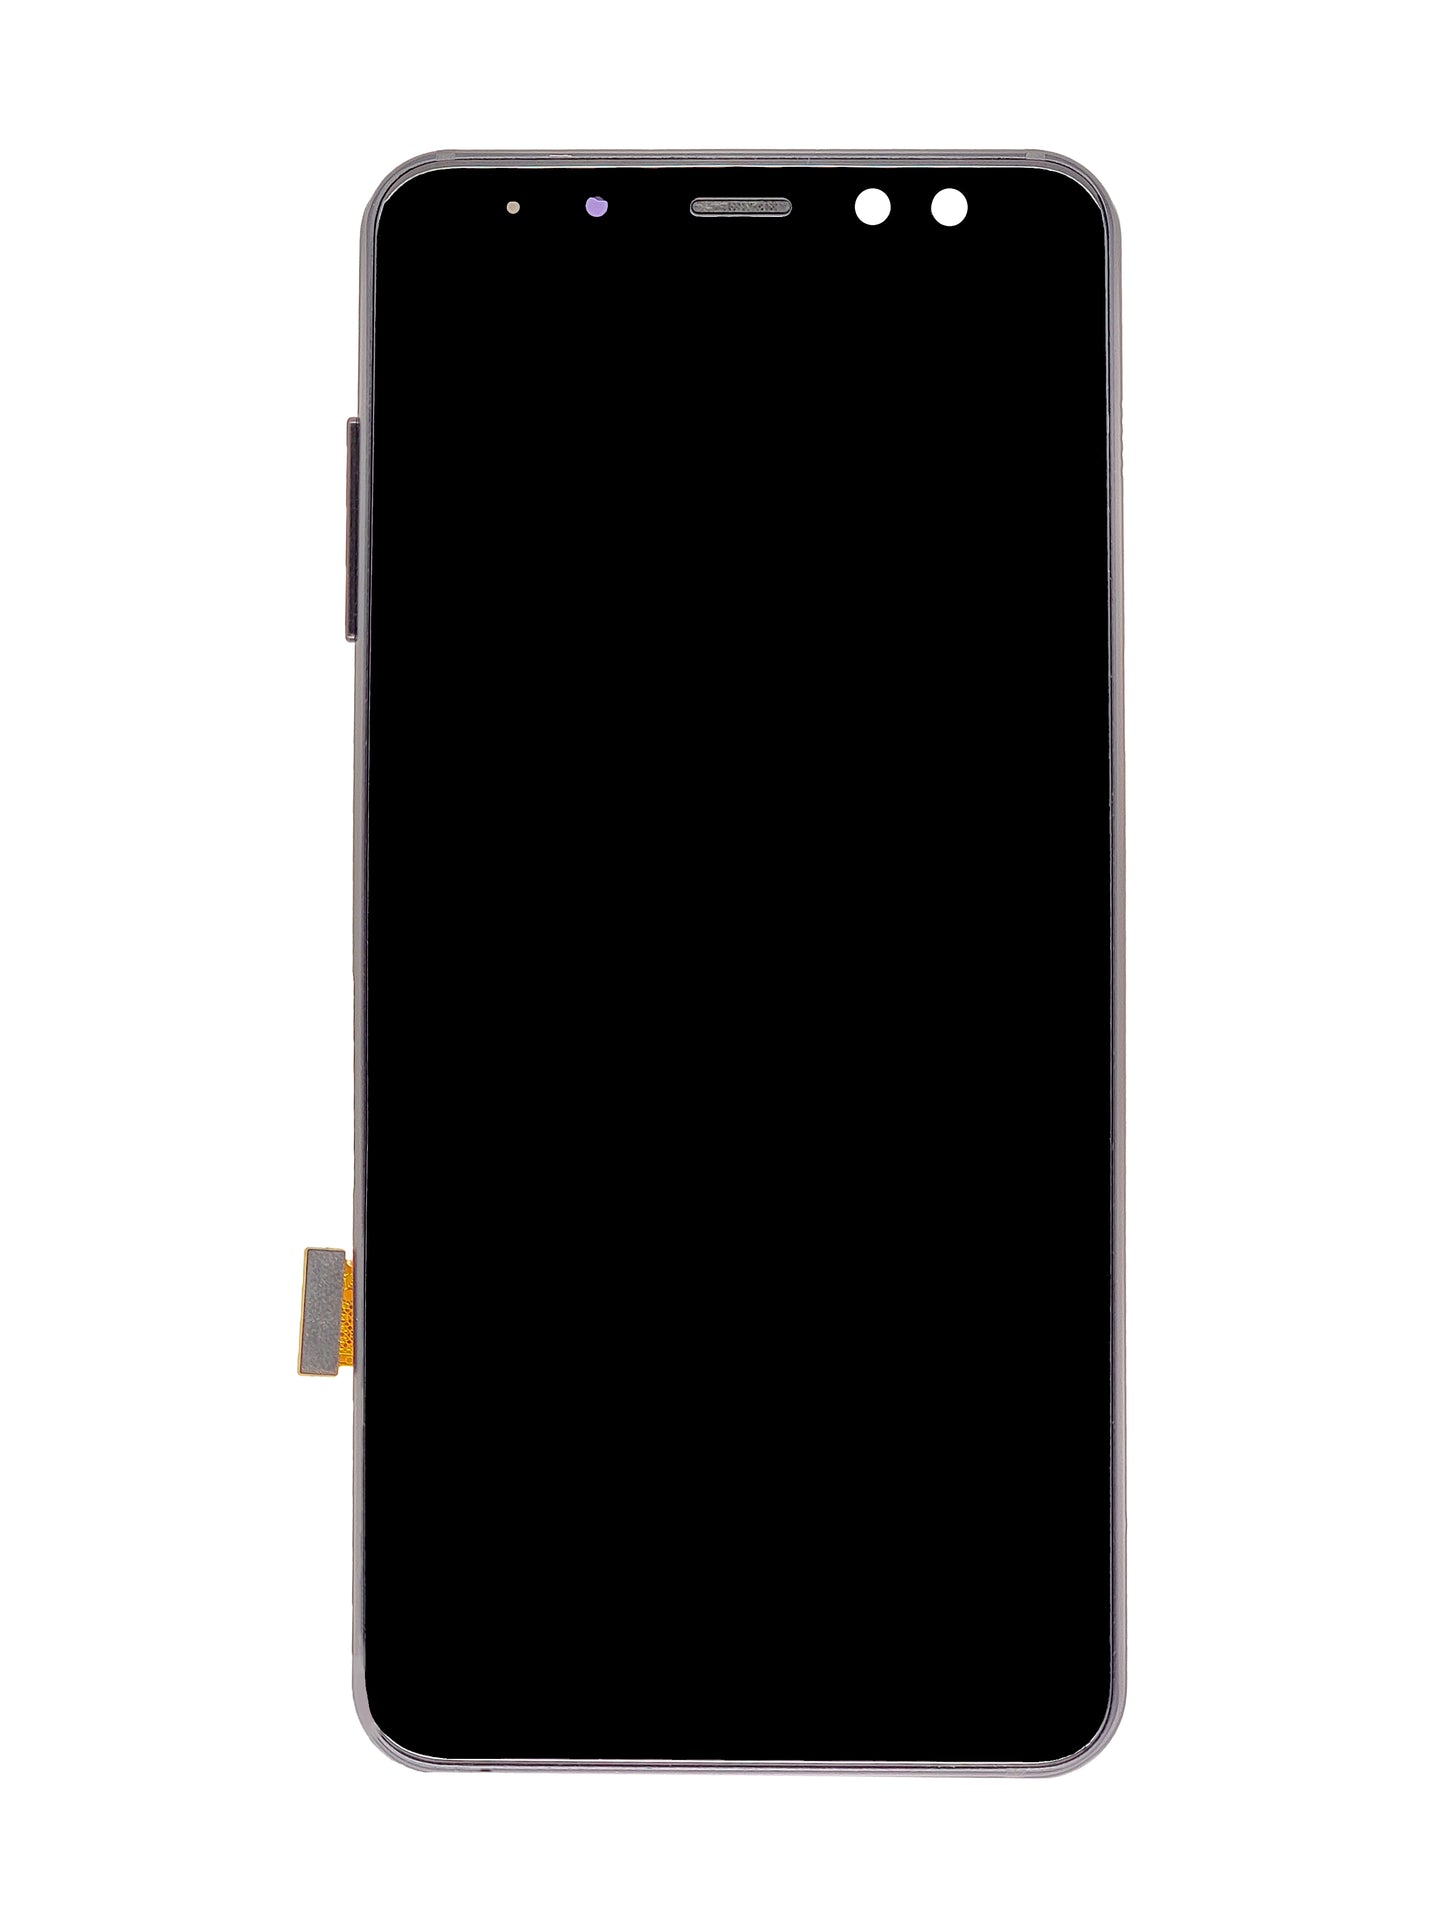 SGA A8 2018 (A530) Screen Assembly (With The Frame) (OLED) (Black)